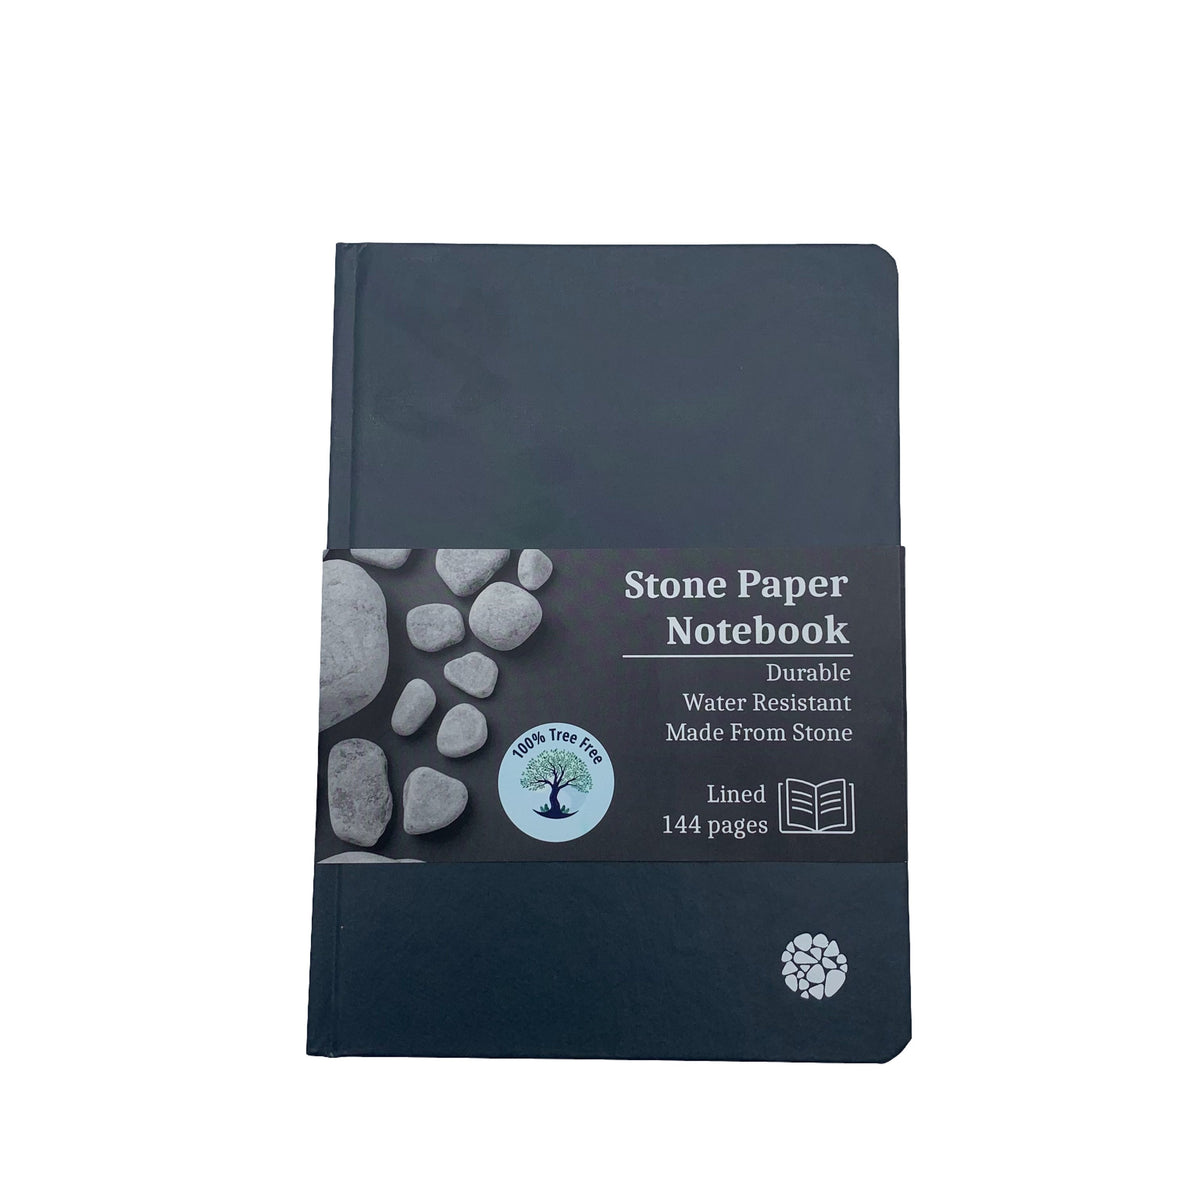 4 reasons why stone paper notebooks might be not for you - Roca Stone Paper  Notebooks